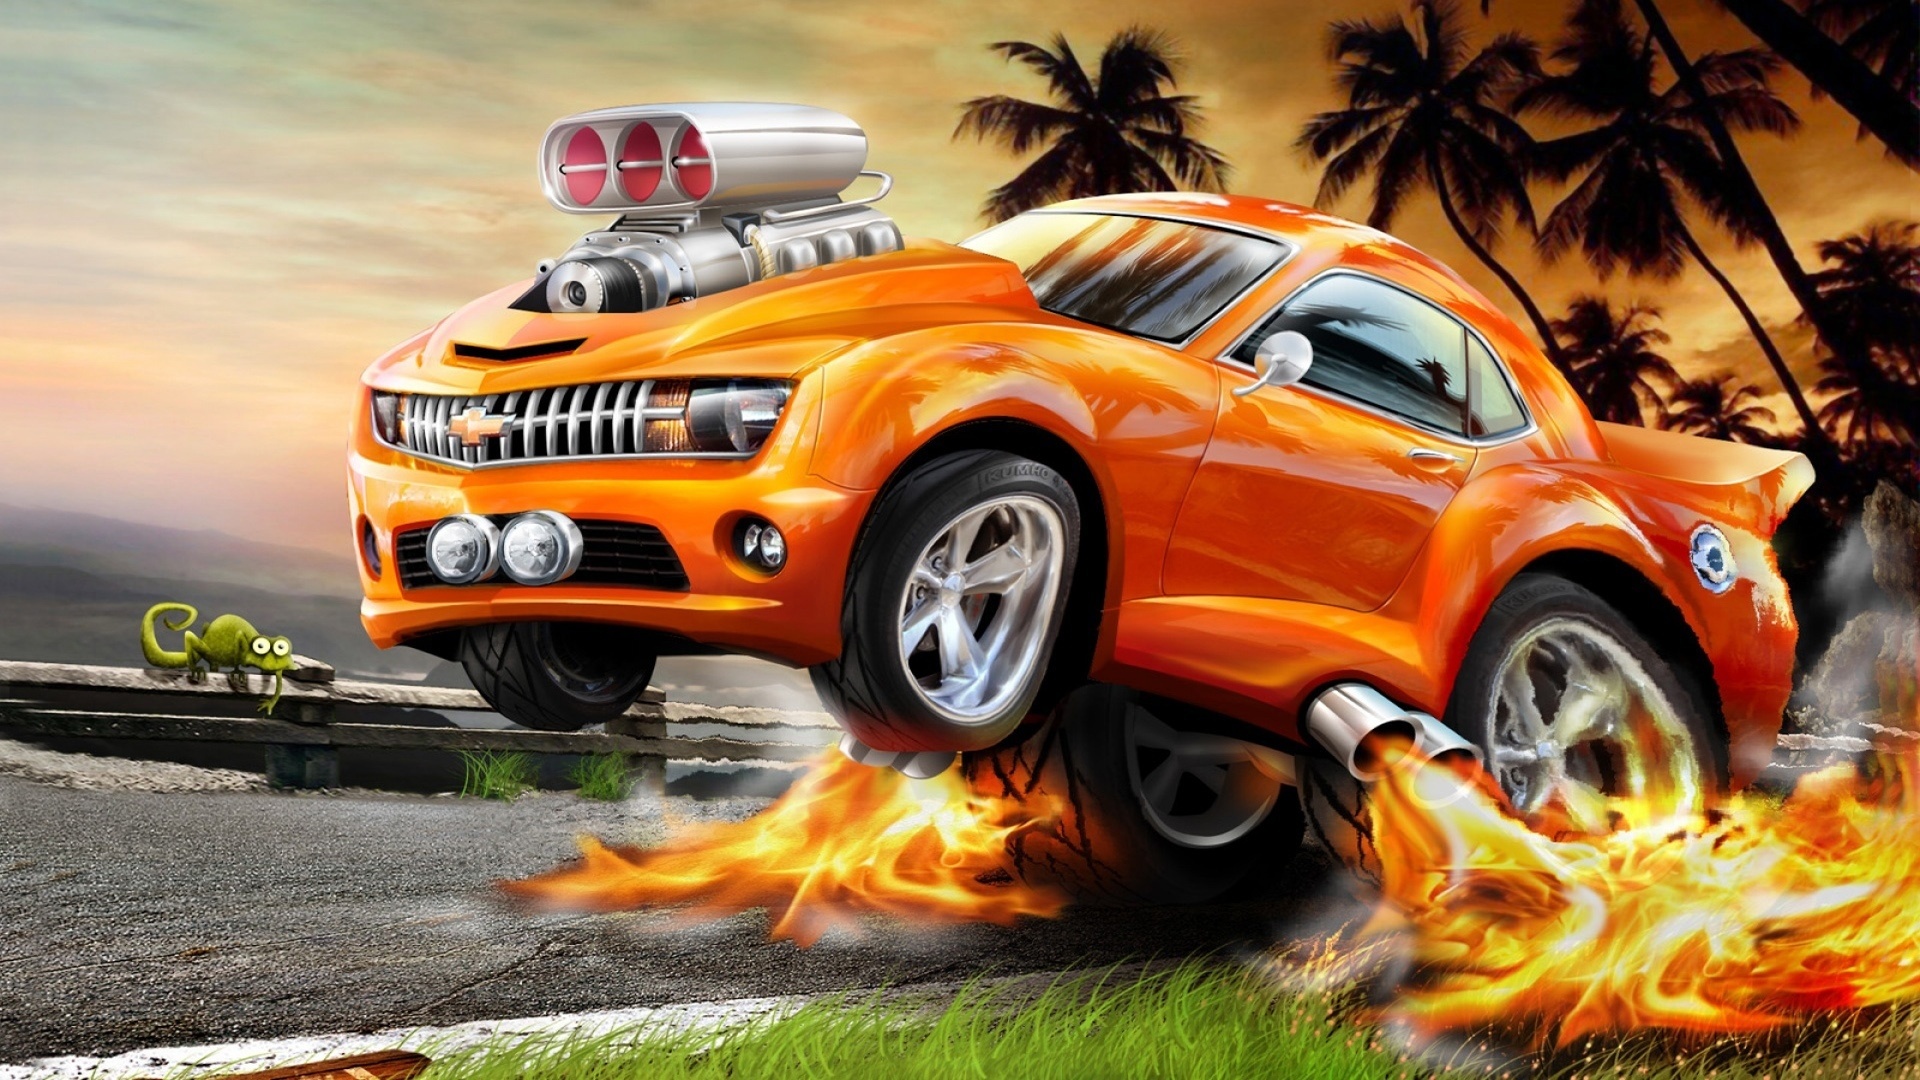 Hot Wheels HD Wallpapers and Backgrounds